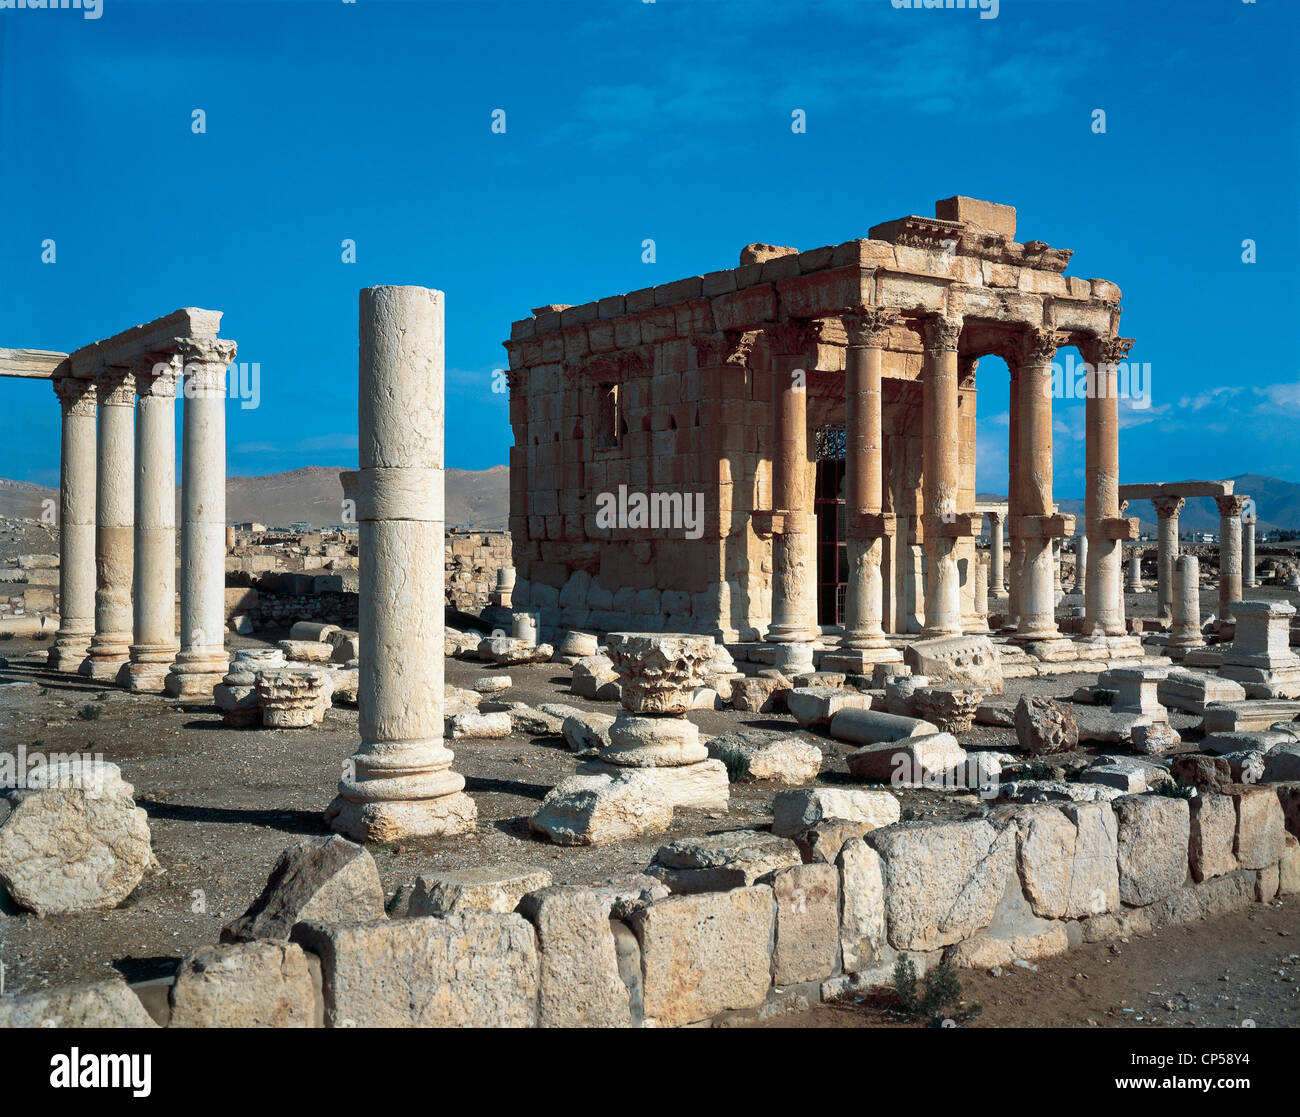 The Temple of Baal Shamin in Palmyra (UNESCO World Heritage Site, 1980), Syria. Syrian Civilizations, 2nd Century. Stock Photo